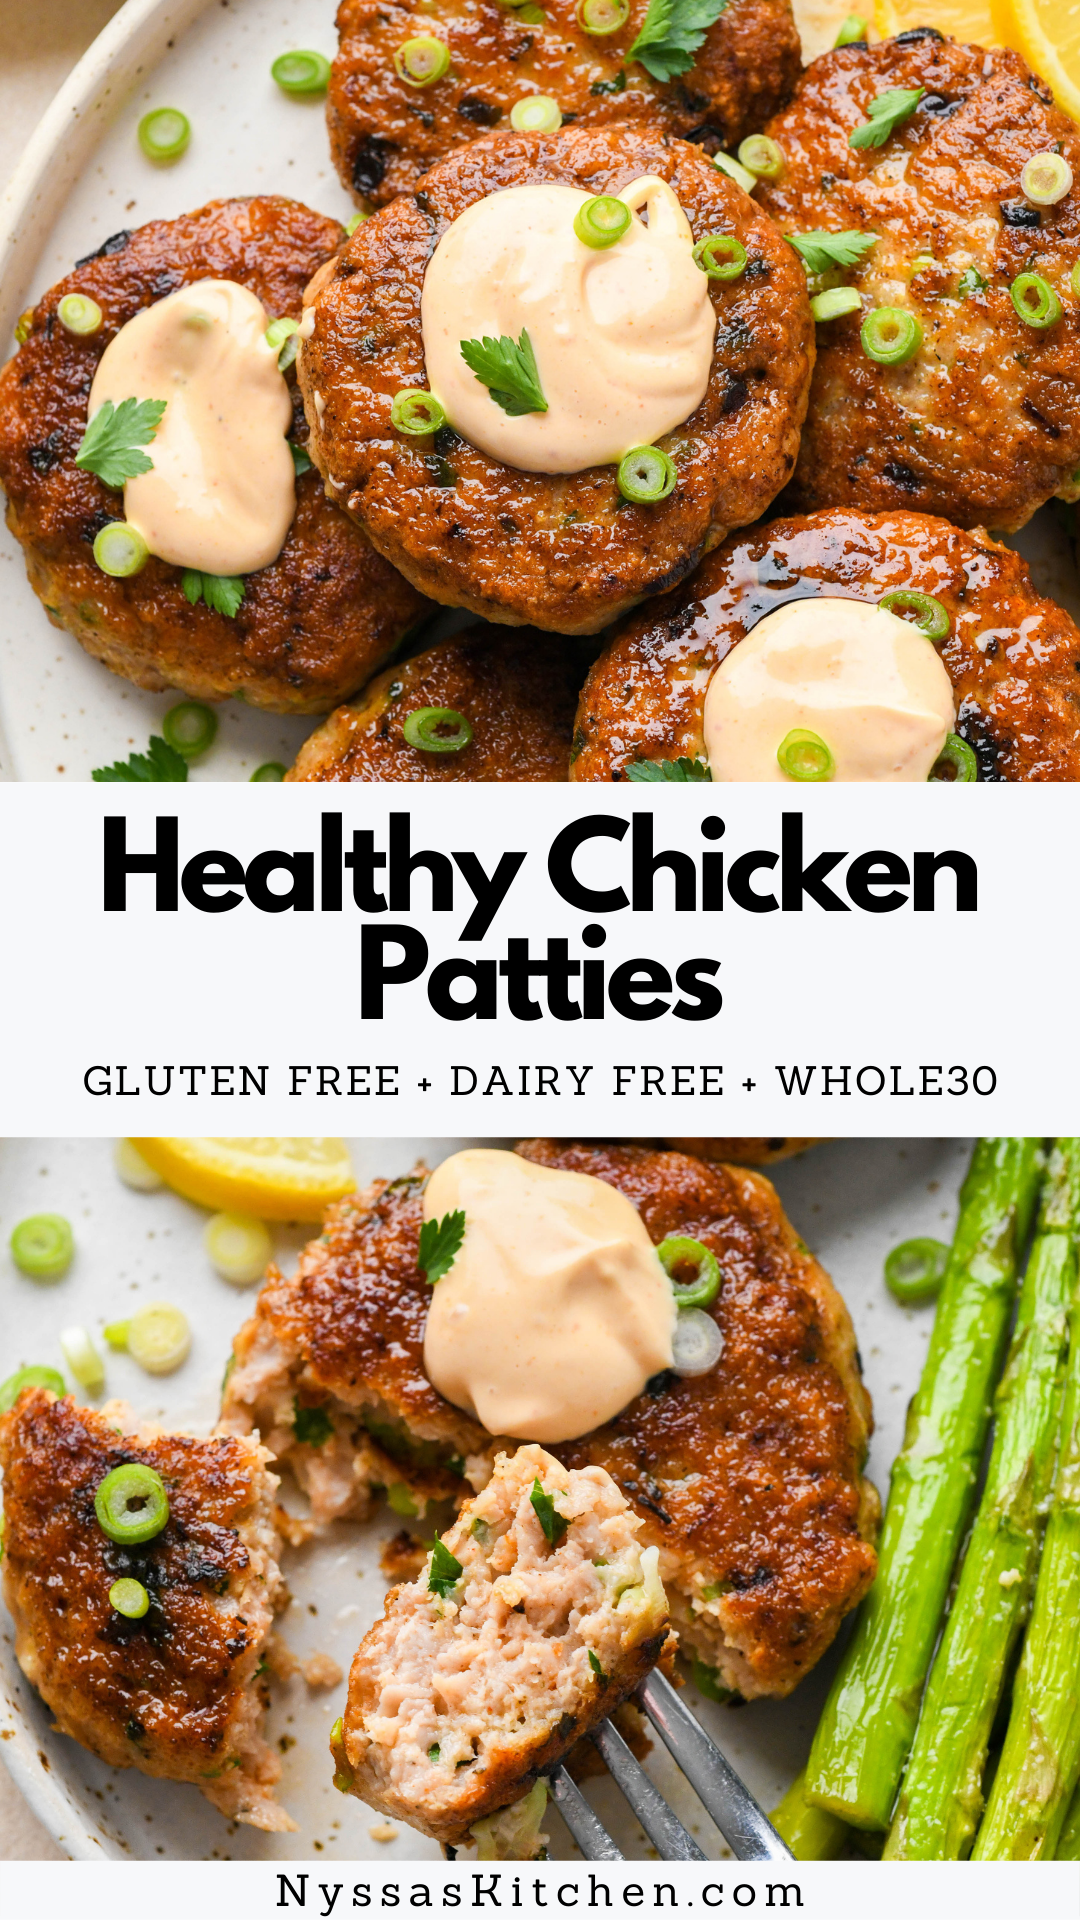 These healthy chicken patties are a delicious protein rich Whole30 dinner option! Made with ground chicken, flavorful spices, green onions, and fresh herbs. Perfect on their own or served with a big green salad or side vegetable. Whole30, gluten free, dairy free, keto, low carb.